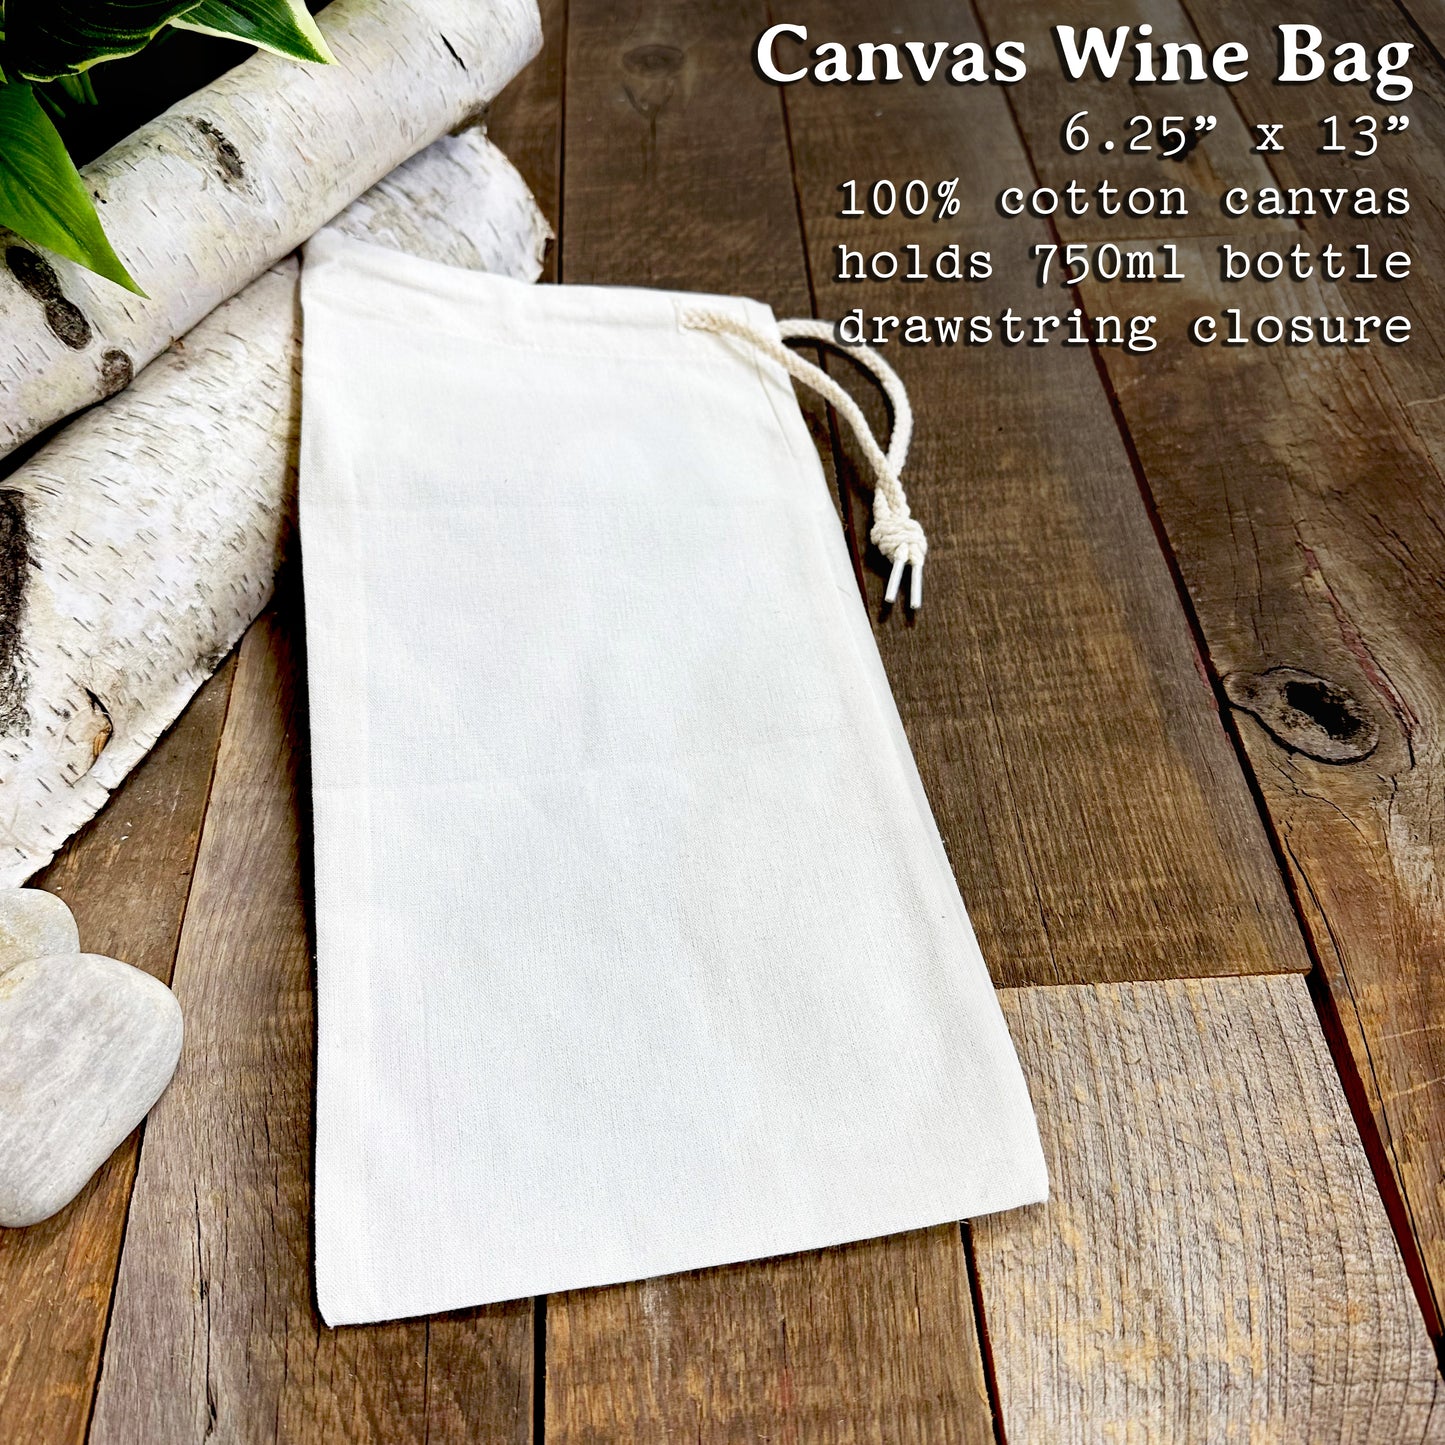 Great Outdoors w/ City, State - Canvas Wine Bag